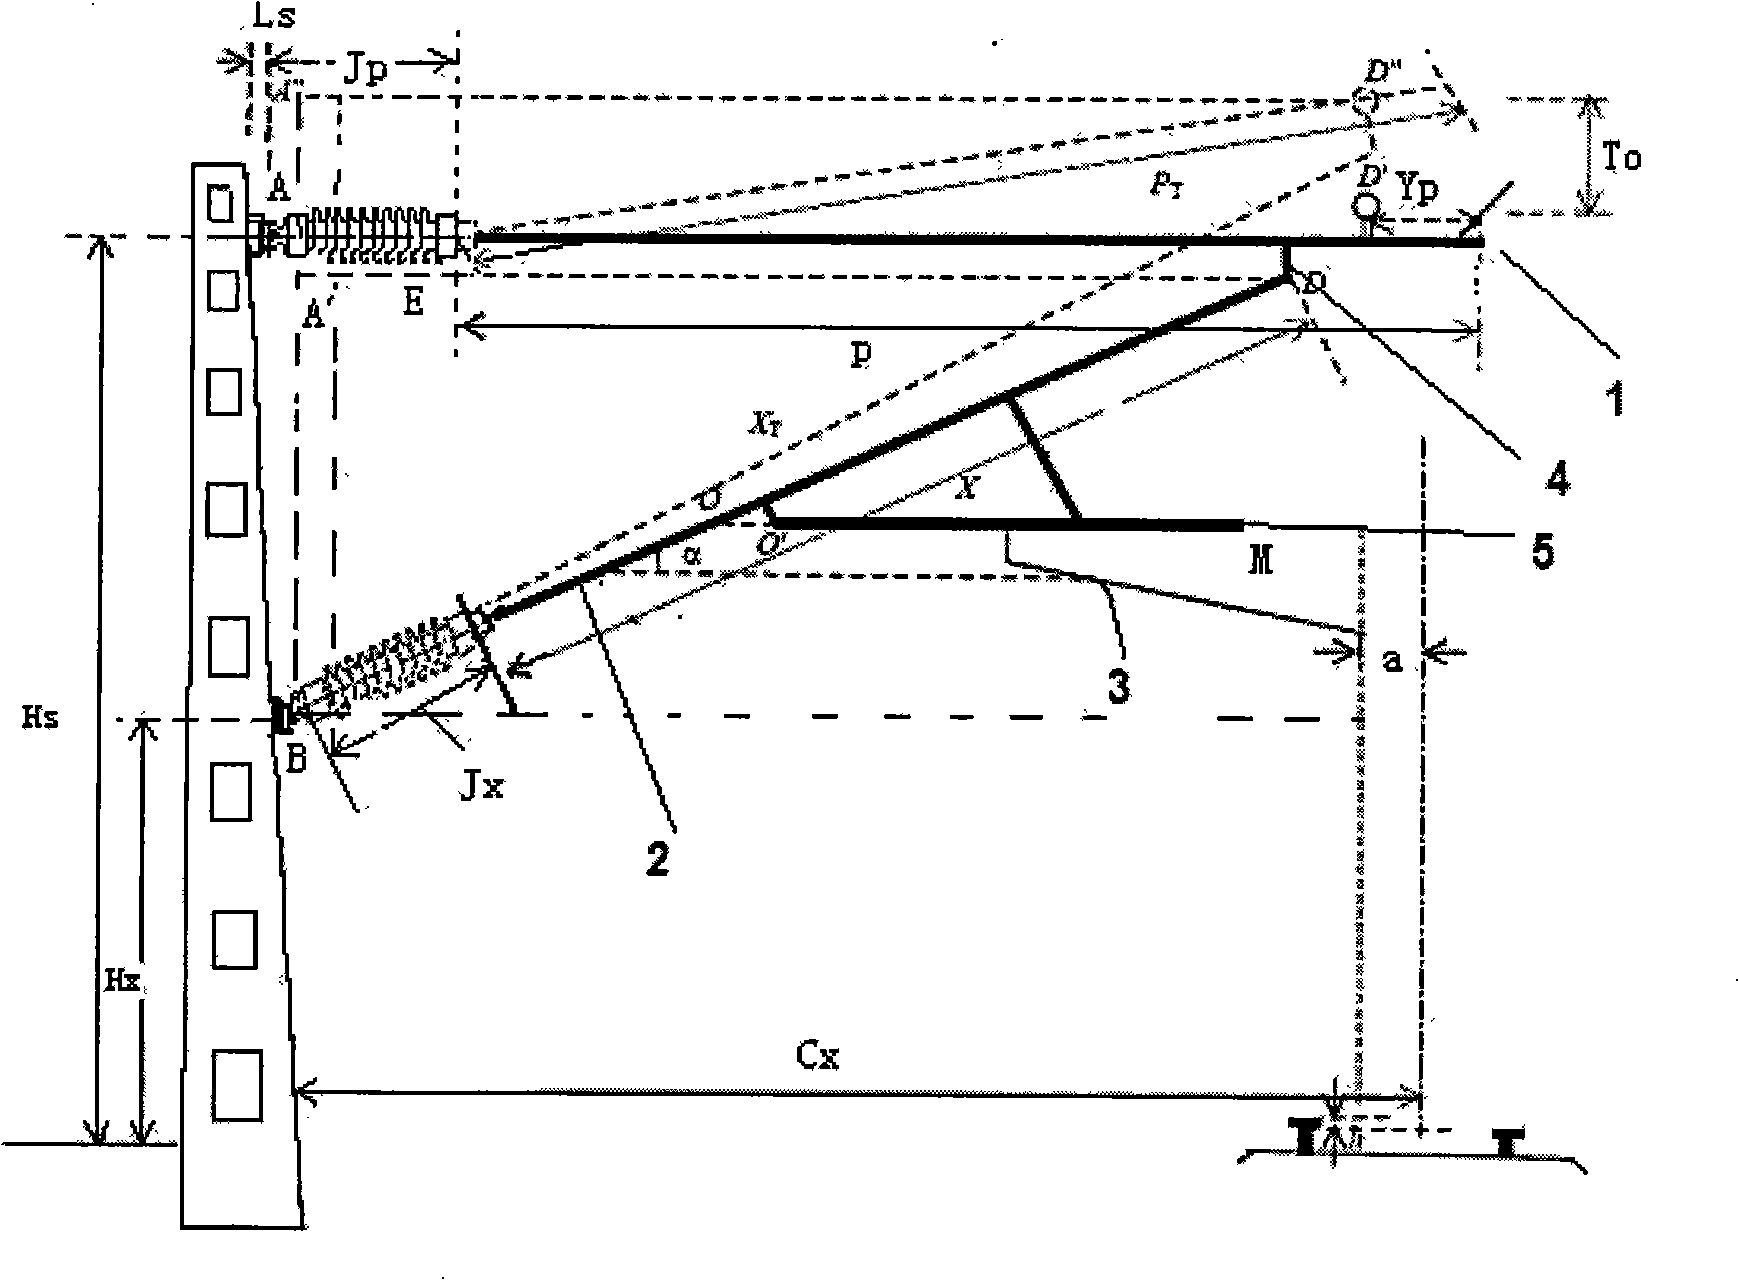 Method for calculating and installing high-speed rail electrification catenary wrist-arm